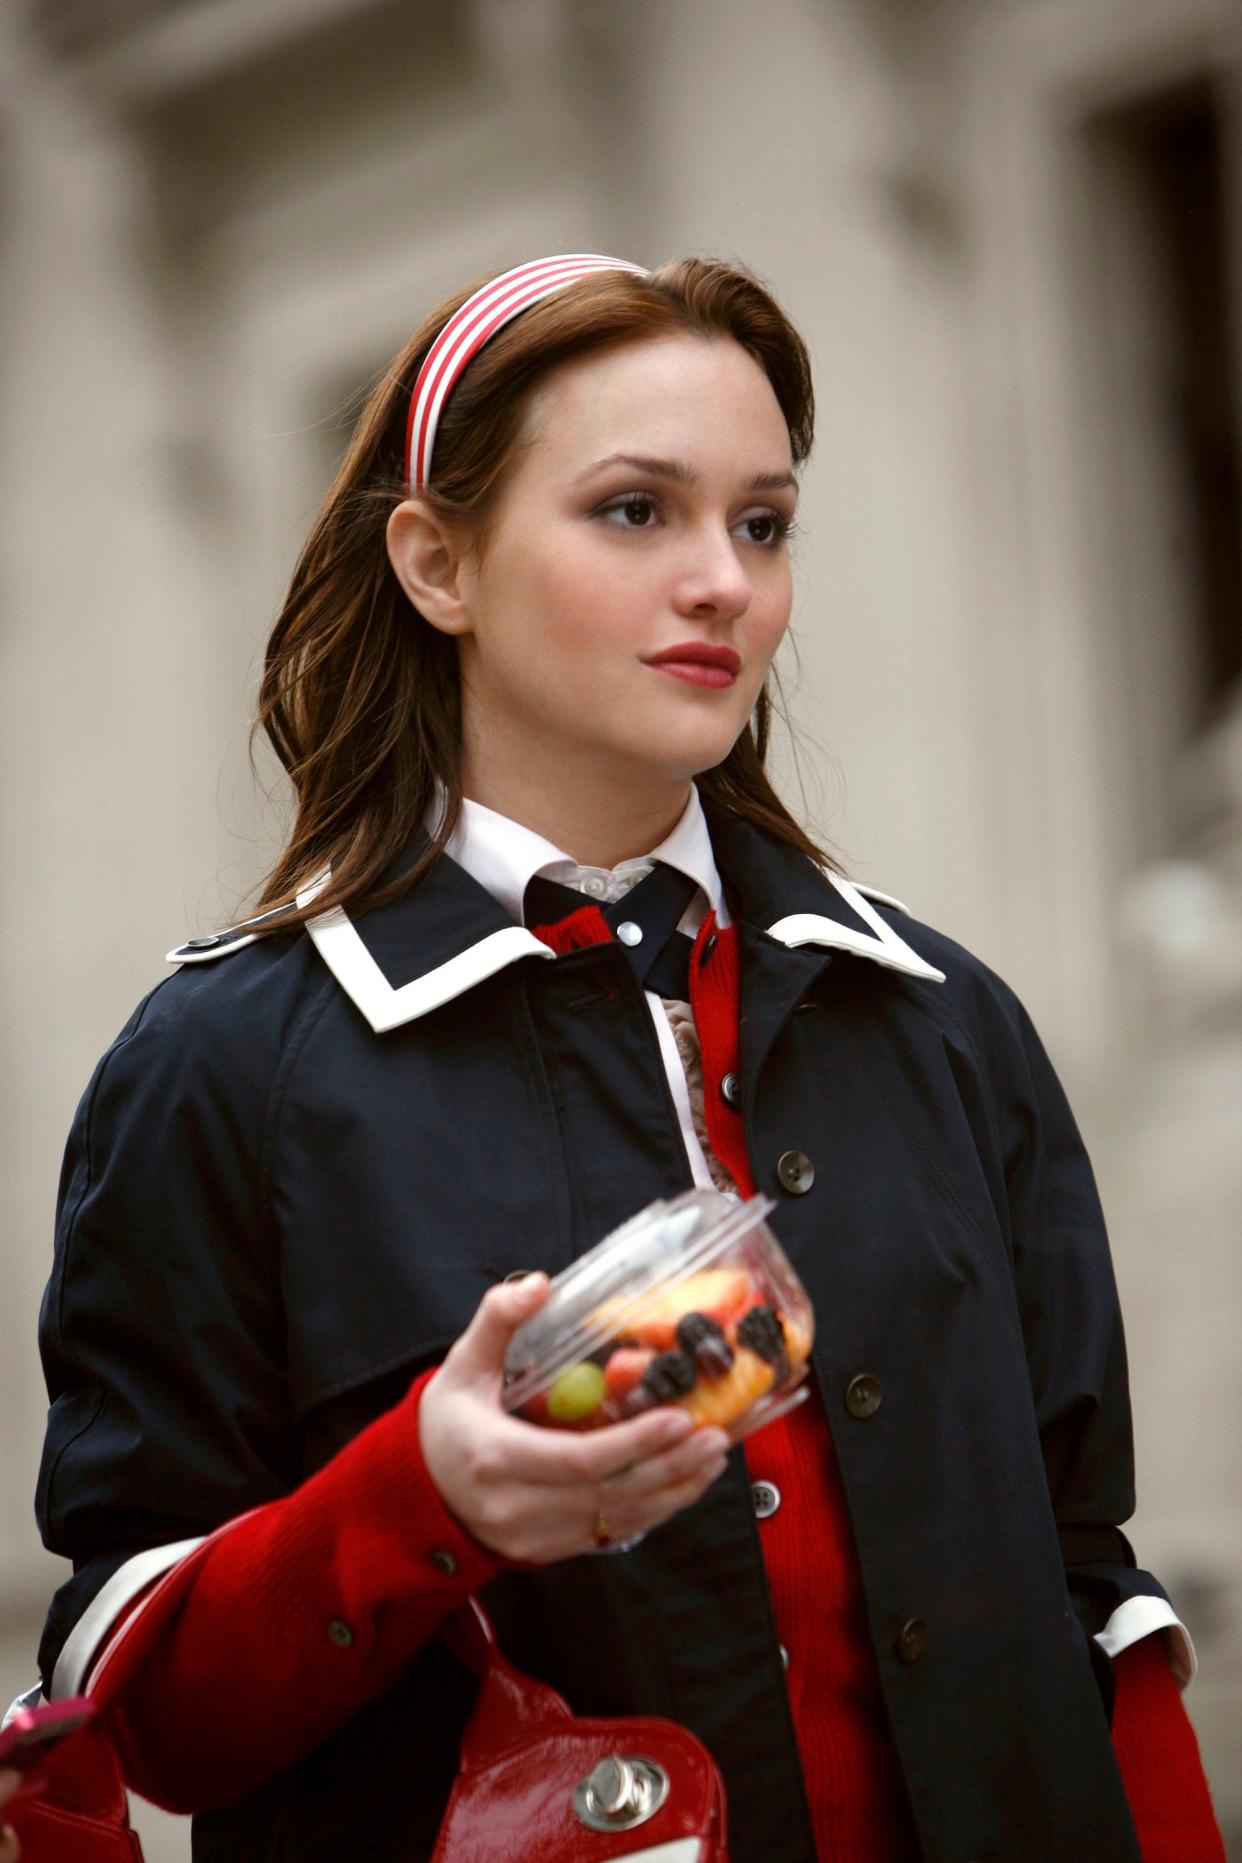 GOSSIP GIRL -- "All About My Brother" -- Pictured: Leighton Meester as Blair